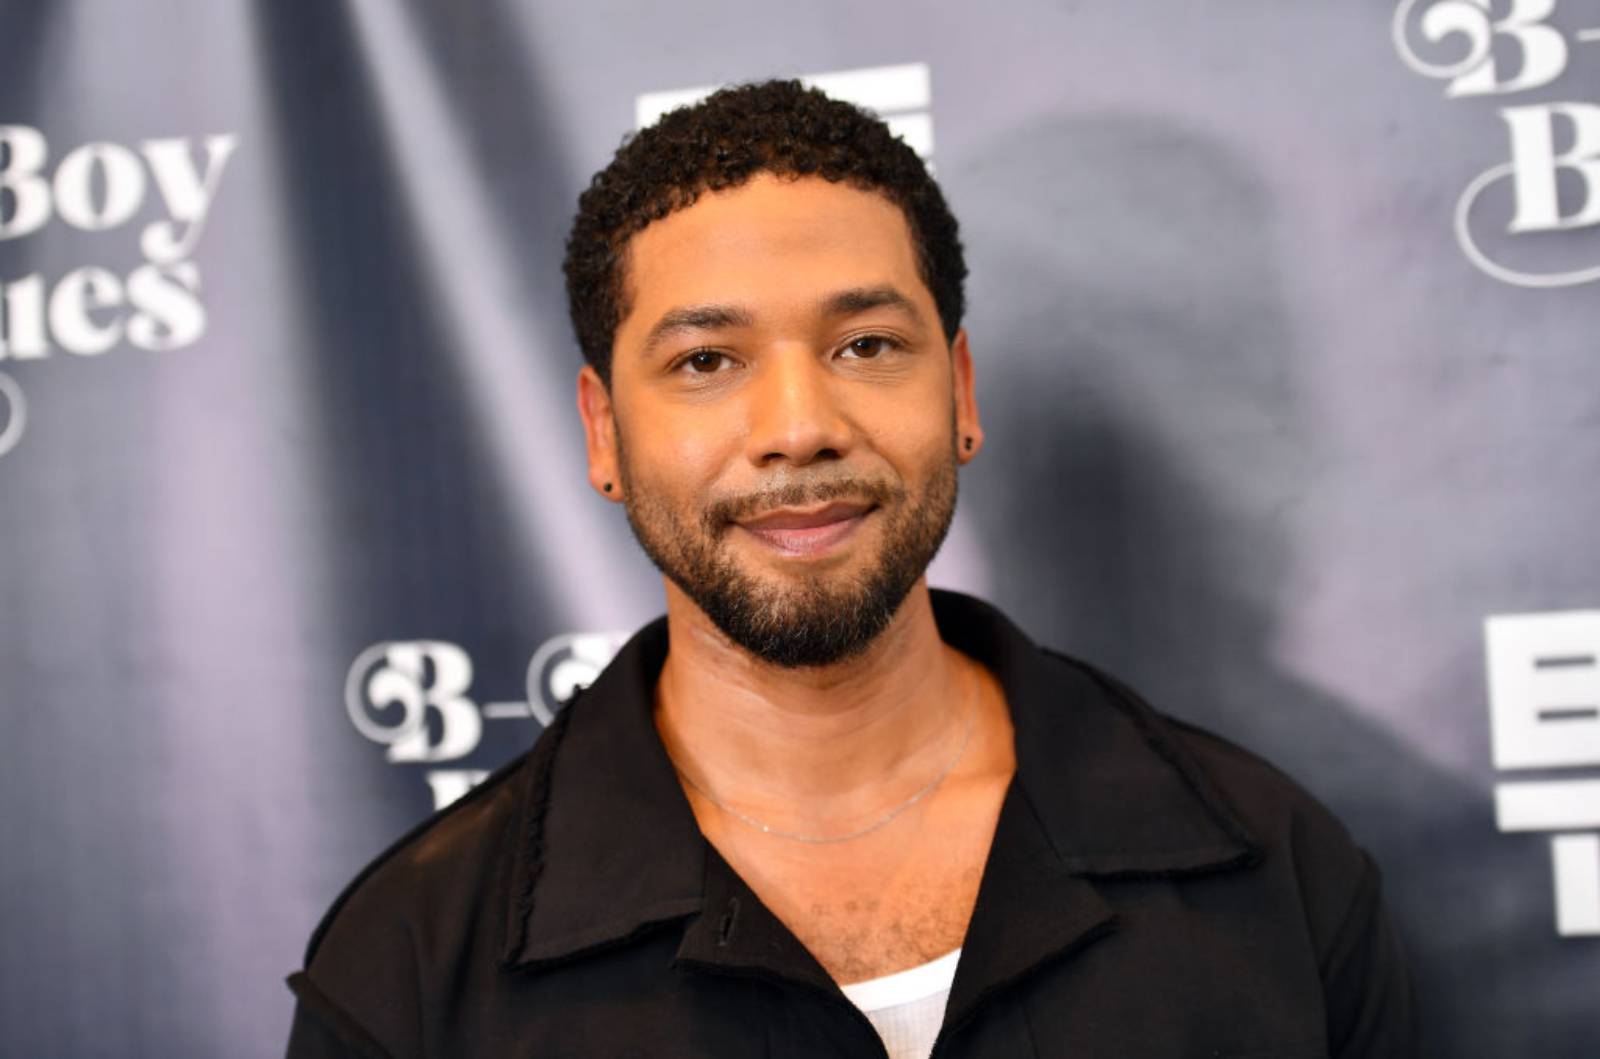 Director/Actor Jussie Smollett attends the Atlanta premiere of "B-Boy Blues" at Silverspot Cinema at The Battery Atlanta on June 08, 2022 in Atlanta, Georgia. (Photo by Paras Griffin/Getty Images)